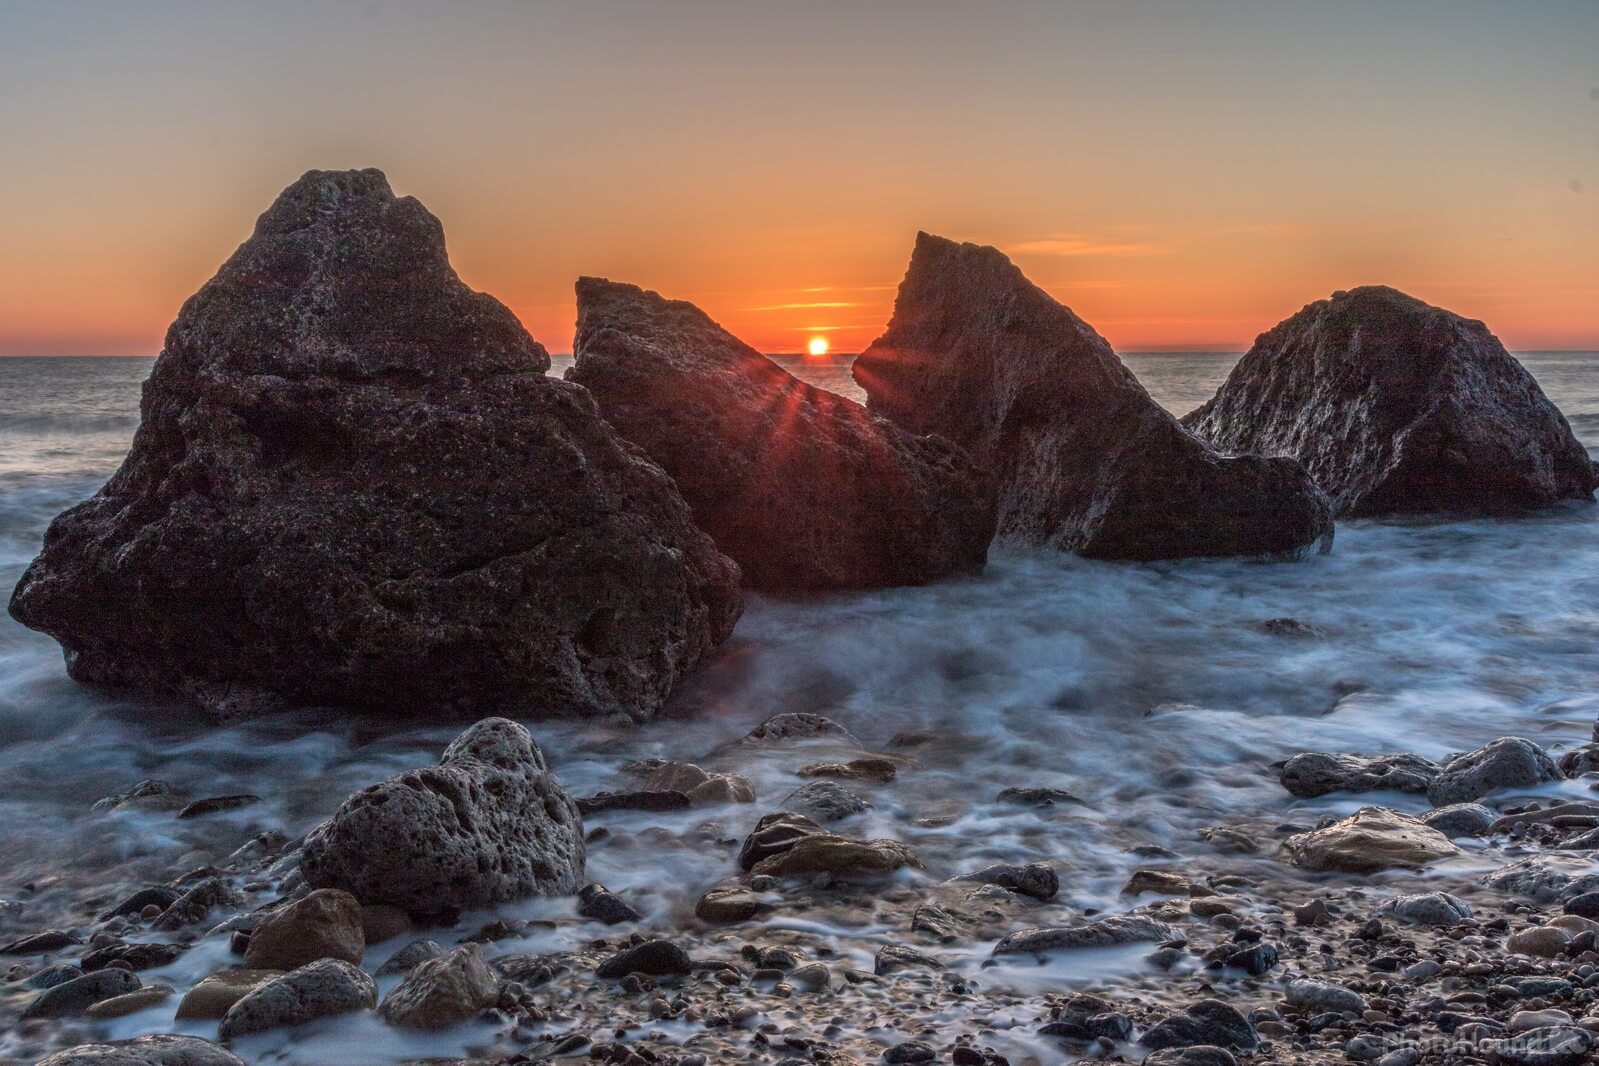 Image of Trow Rocks - The 4 Sisters by Andy Killingbeck